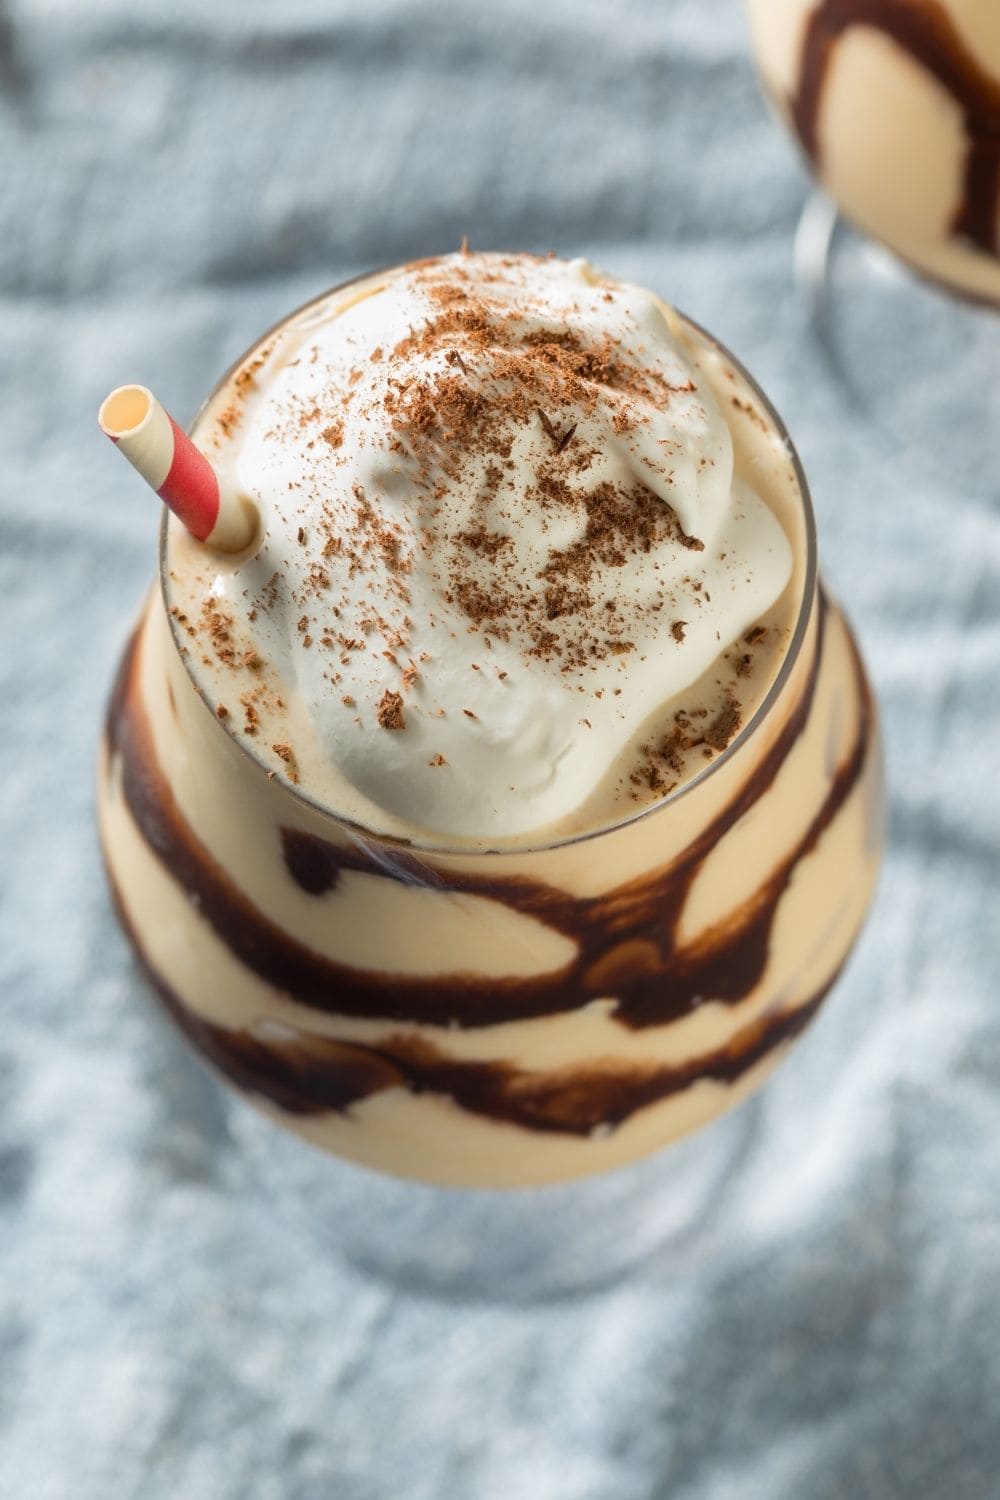 Creamy cocktail drink with chocolate syrup topped with whipped cream and chocolate powder.